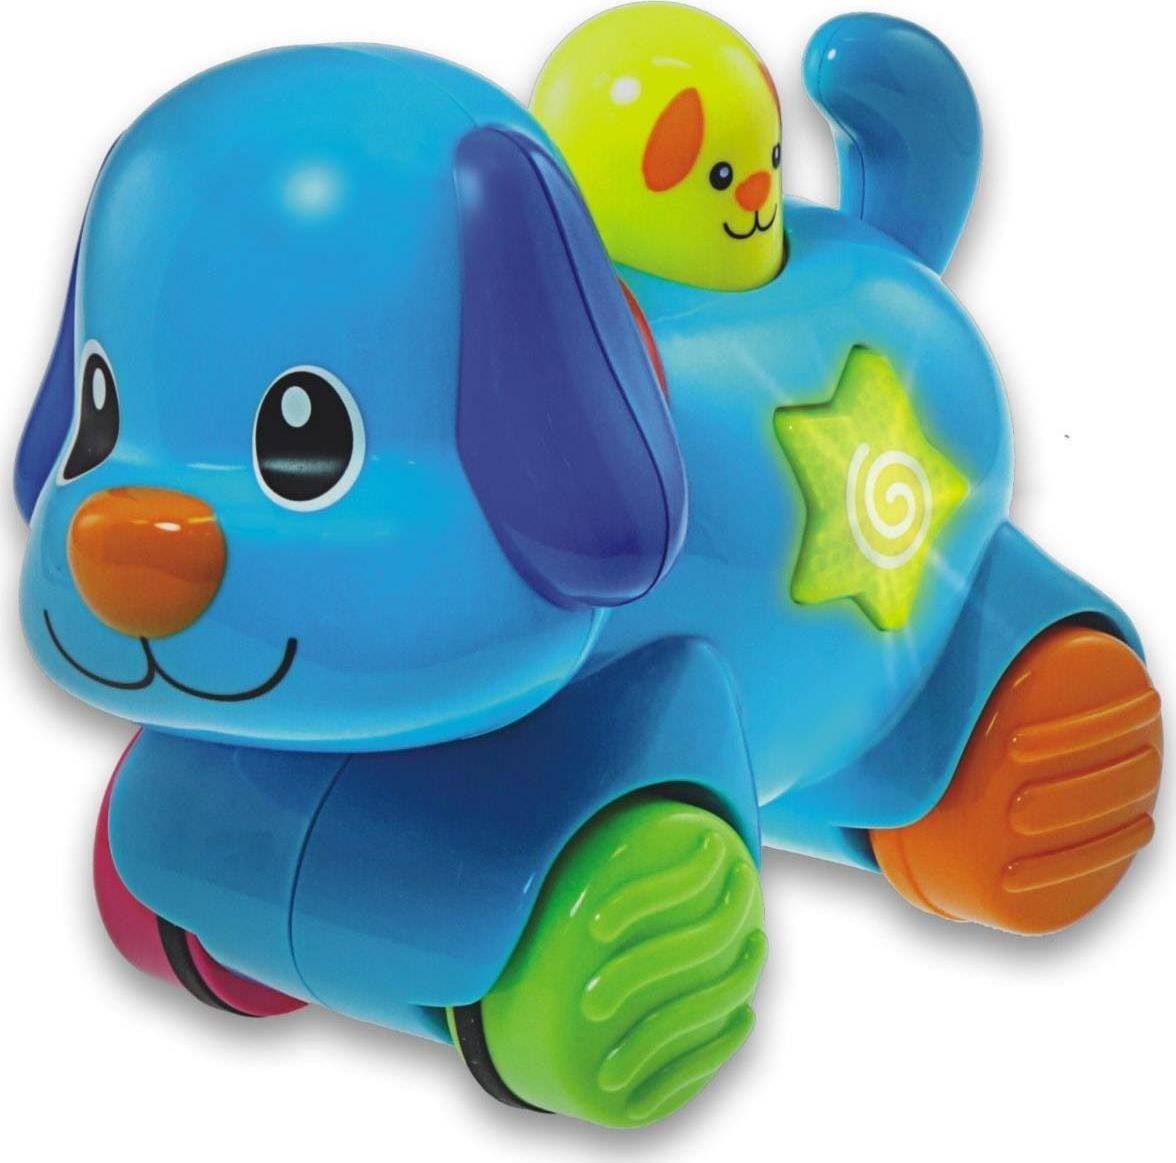 Smily Play Pets Press and Go Blue Dog (000733)